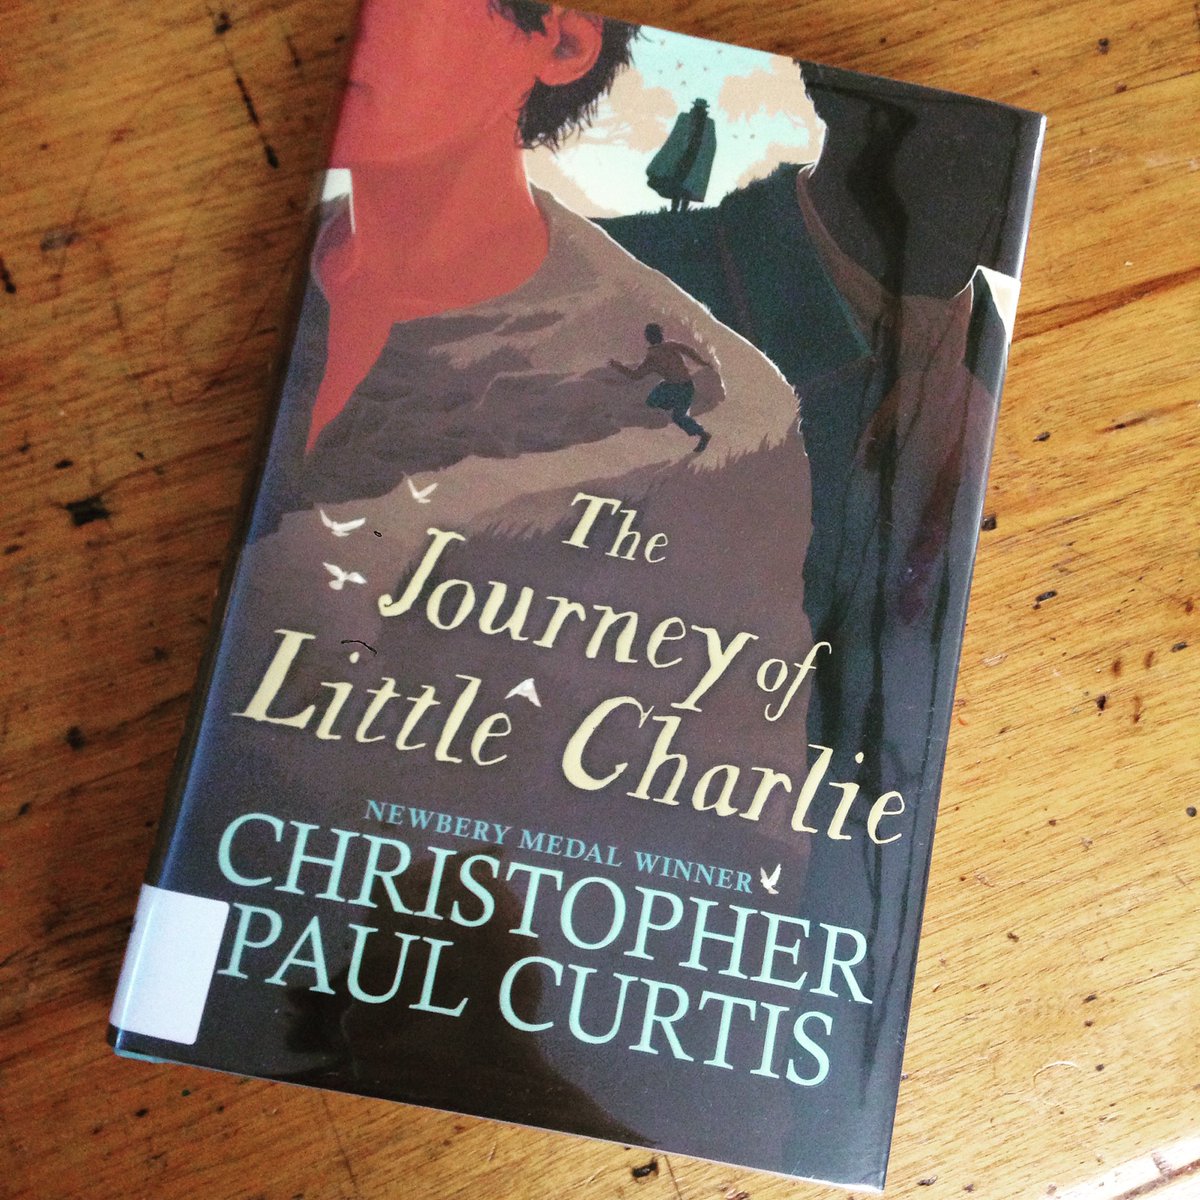 My review of this amazing middle grade novel is up on the blog.  @scholasticCDA #TheJourneyofLittleCharlie #MiddleGradeMonday 
storytimewithstephanie.org/home/mnb4shp4r…